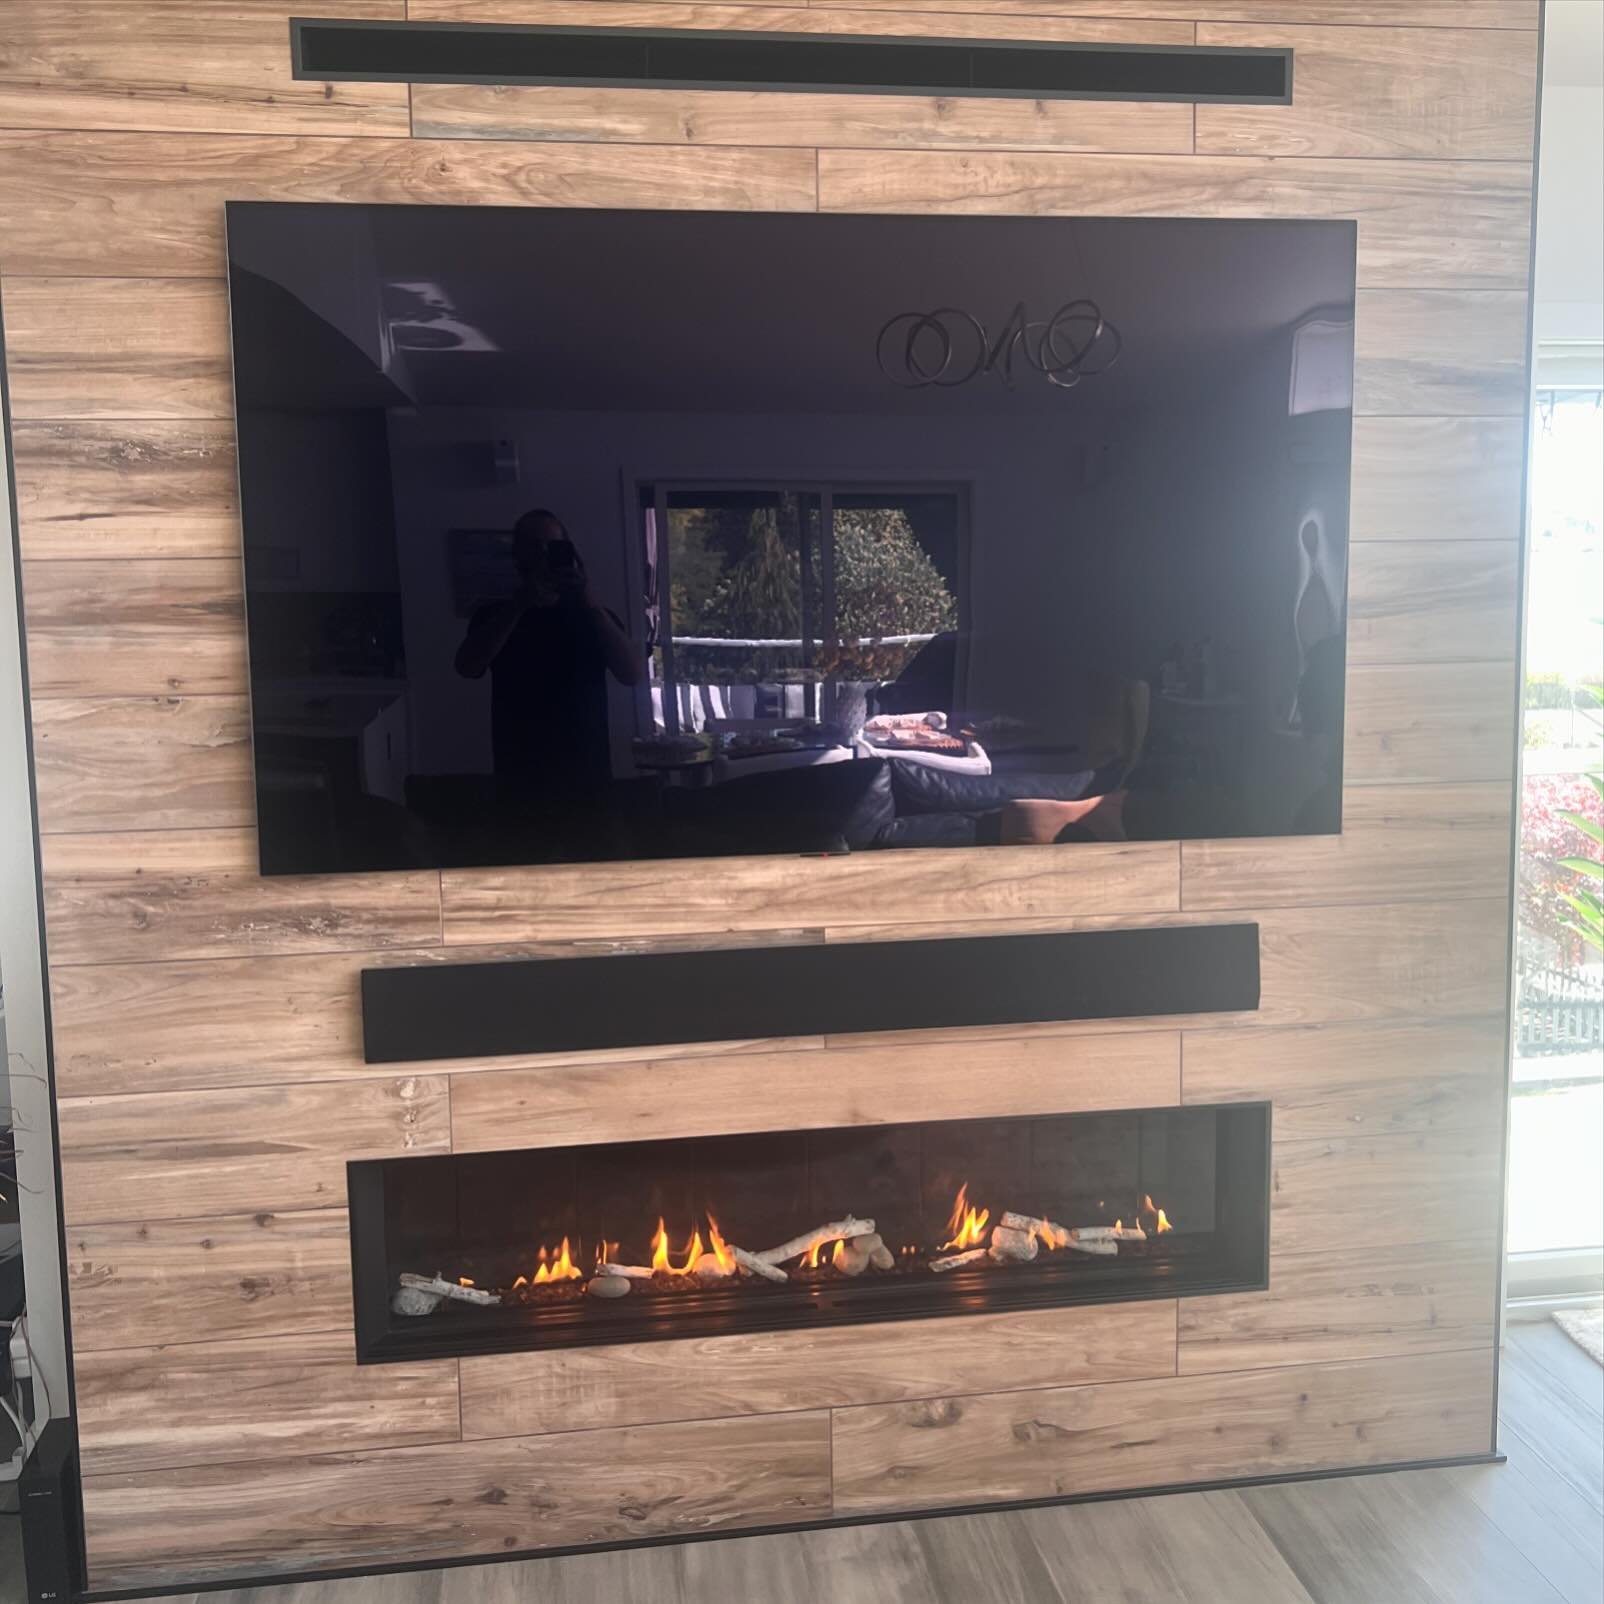 @solasfireplaces Built In SixtyO w/ Birch Logs &amp; Heat Distribution Kit to Protect TV from Overheating

#gasfireplace #nogasban #remodel #fireplace